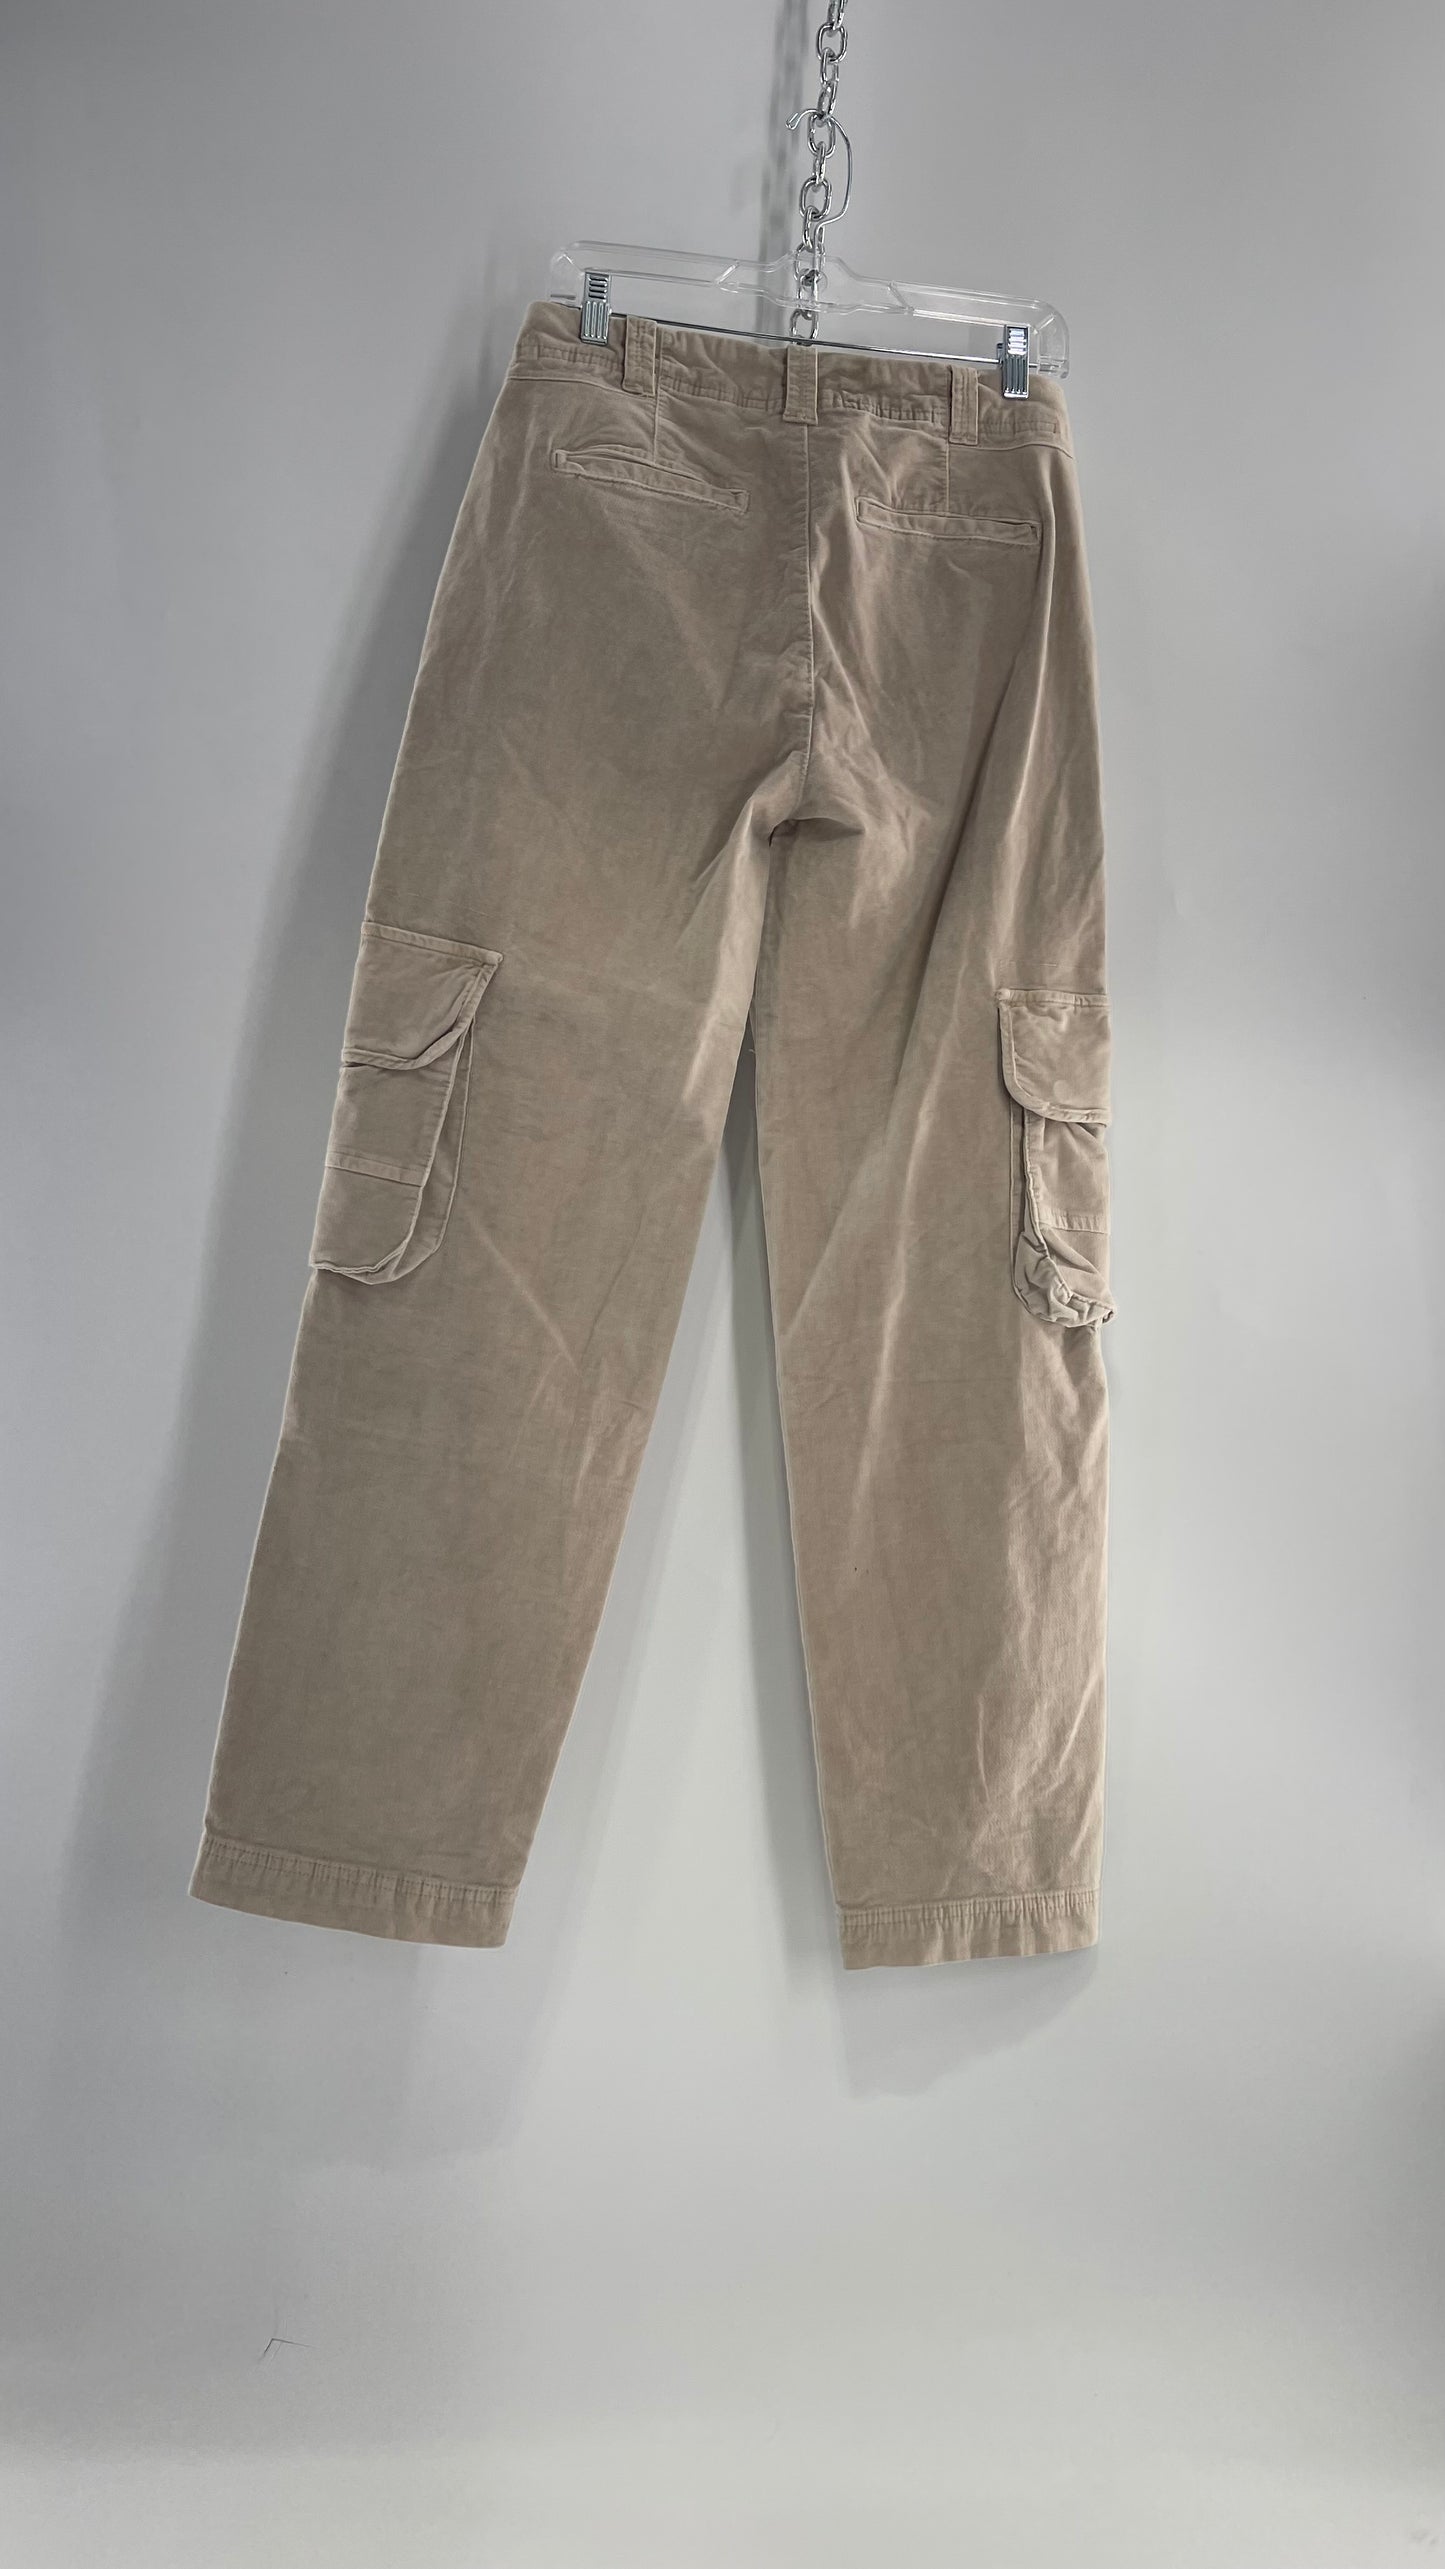 Free People Ultra Soft Velvet/Corduroy Gray/Beige Baggy Cargos with Side Pockets (2)